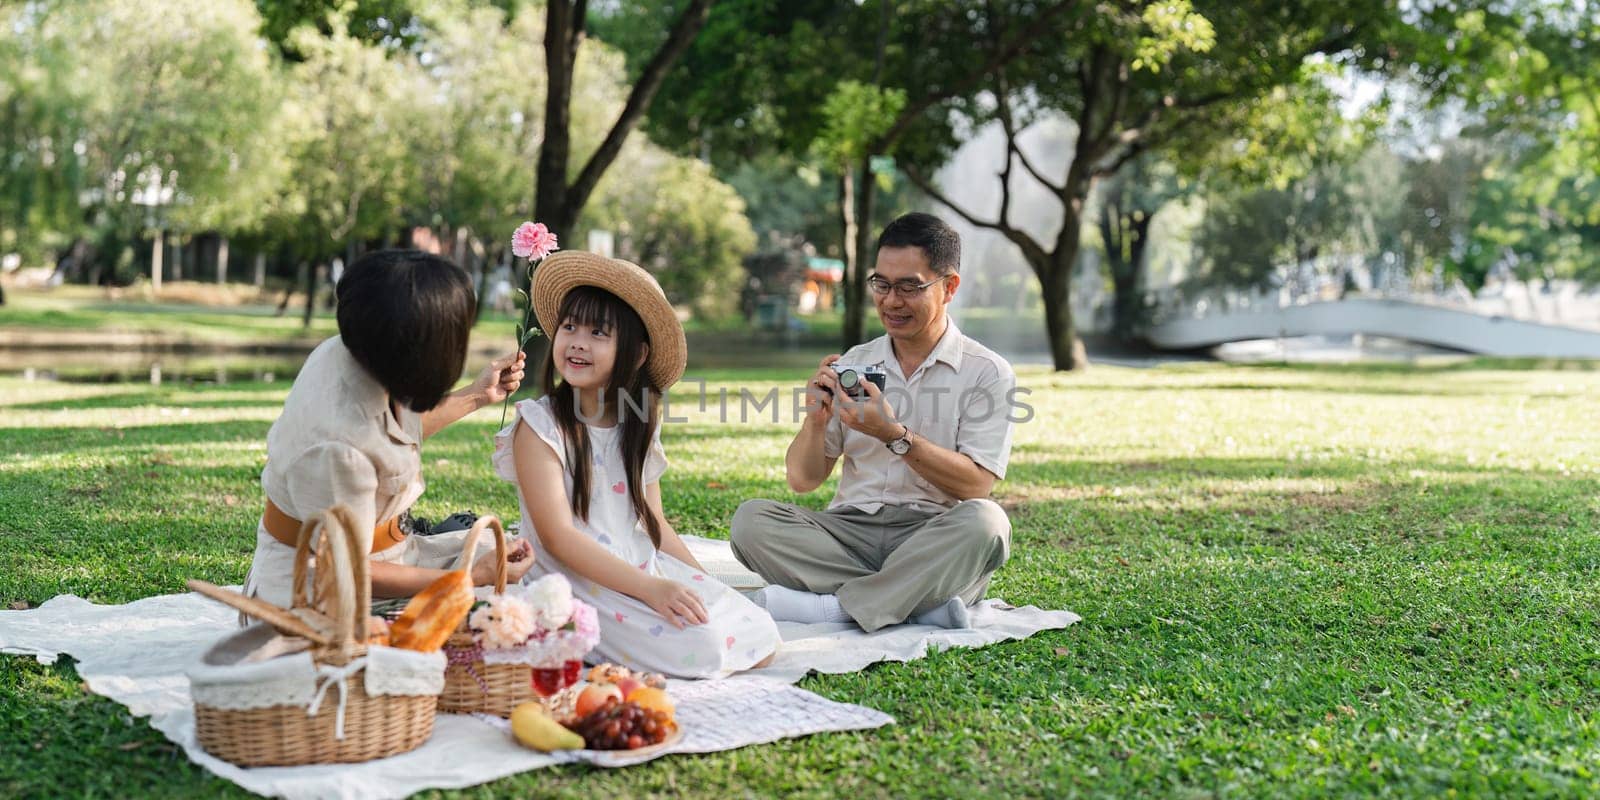 Family day, family picnic together at the park. Retired grandparent take granddaughter to relax and spend time together at the park by itchaznong